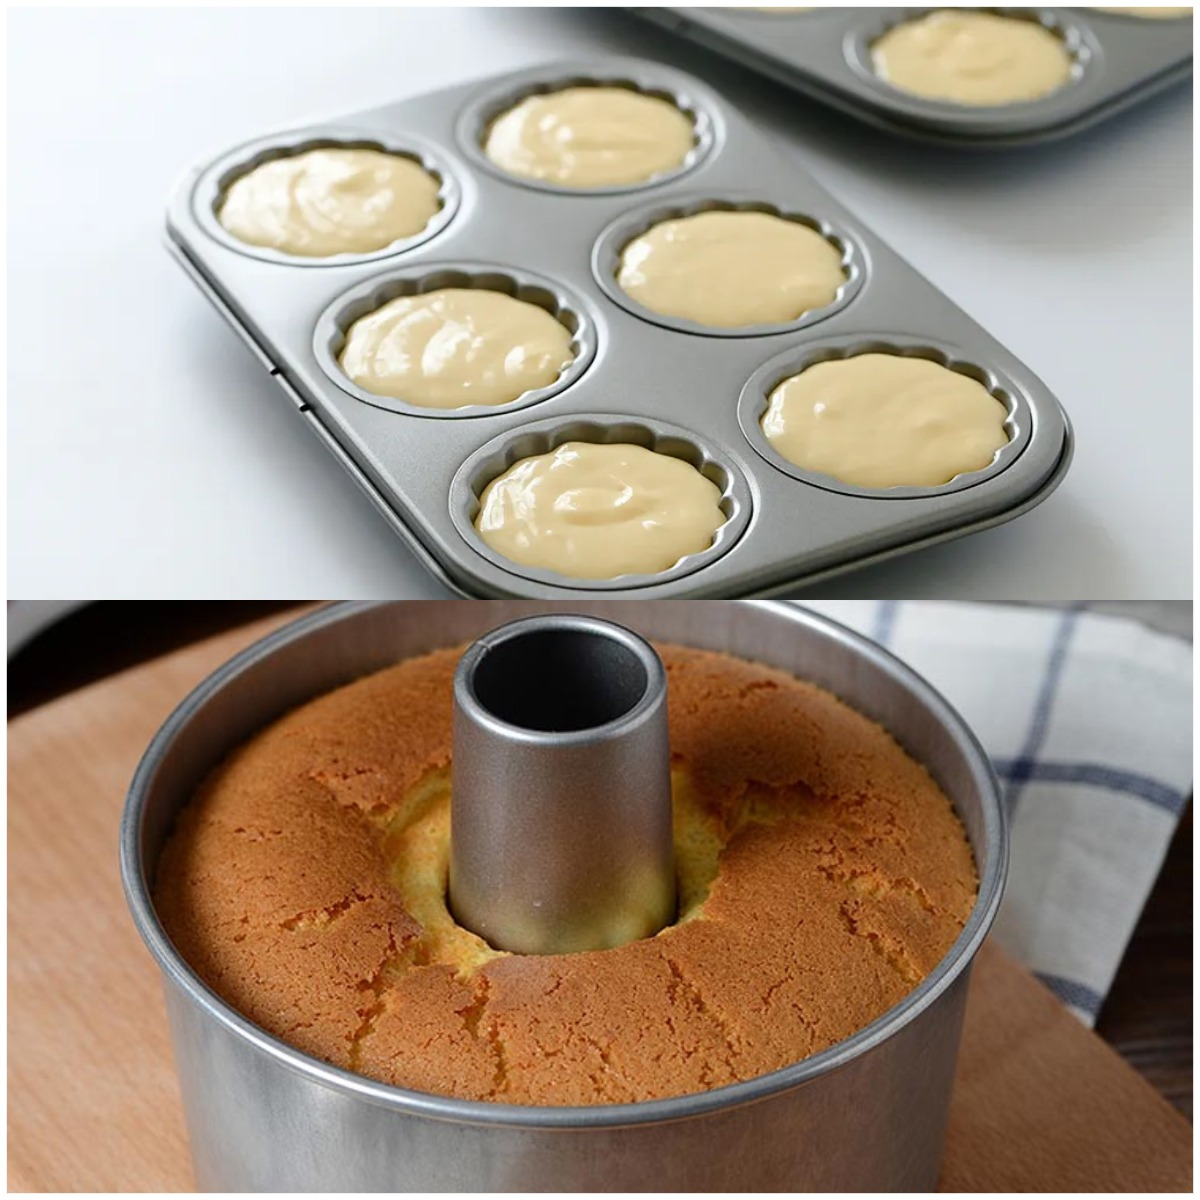 How to clean baking molds quickly